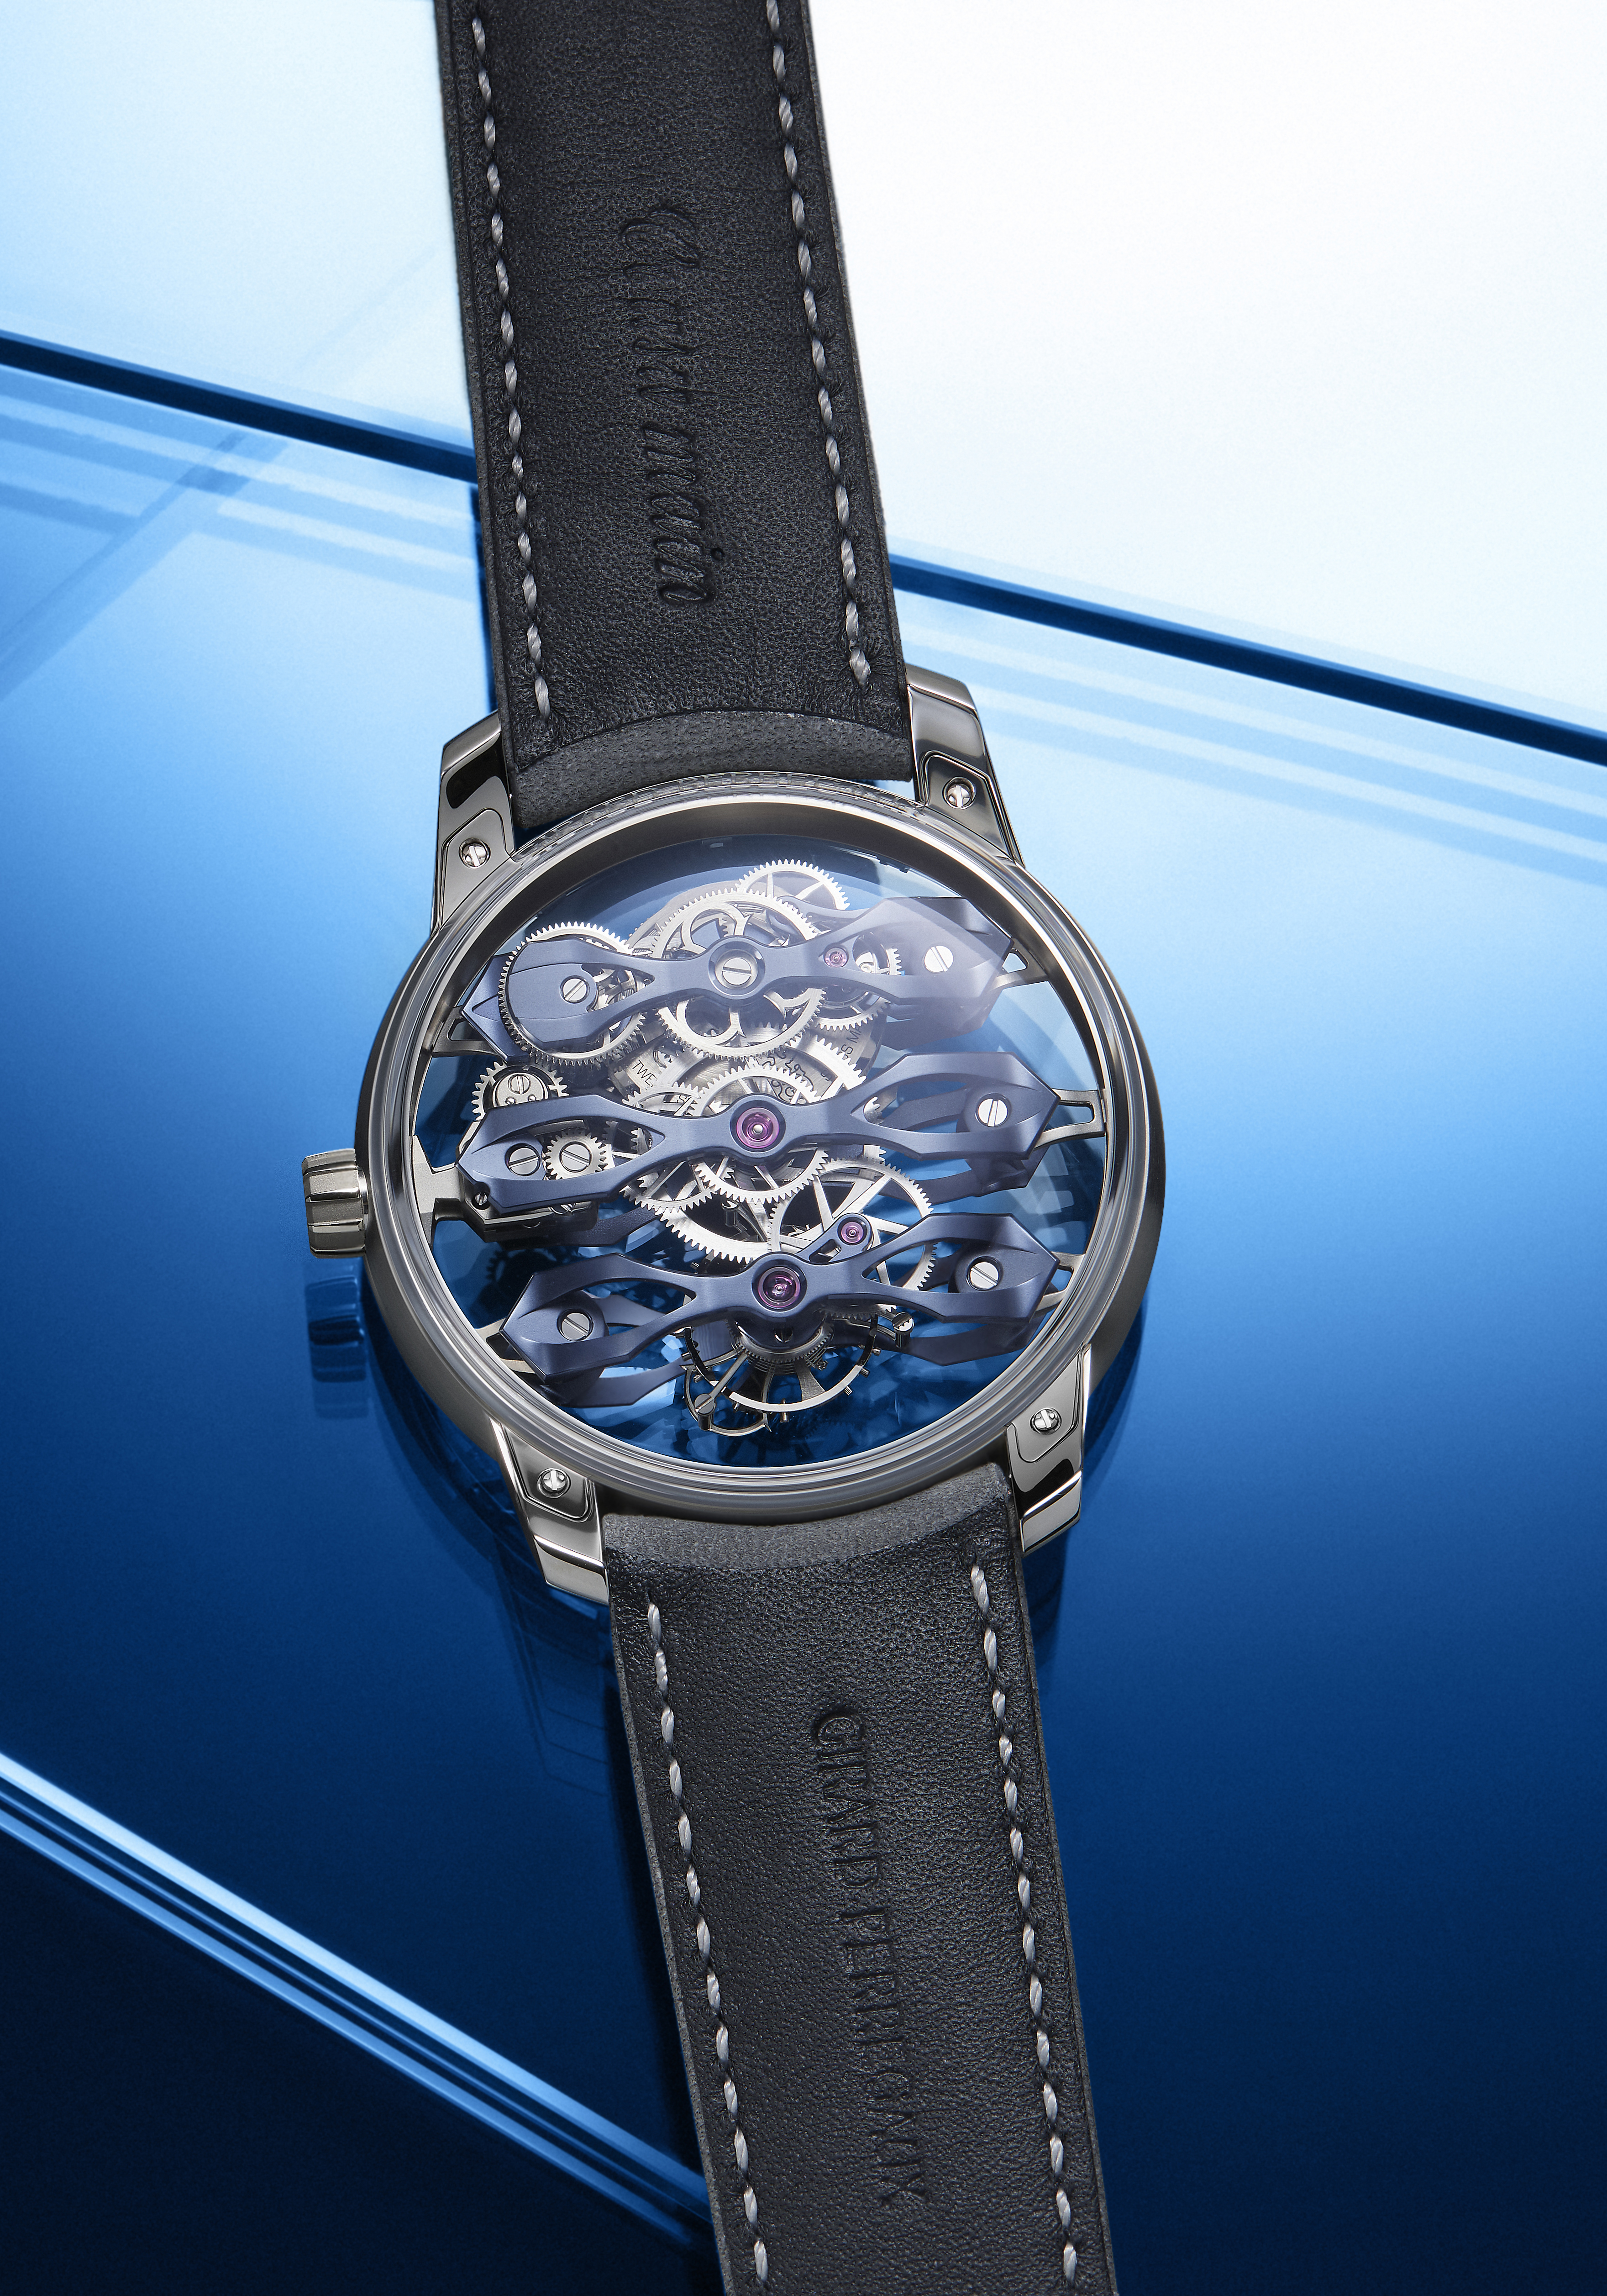 Bucherer Blue Presents Three Exciting New Timepieces For 2022